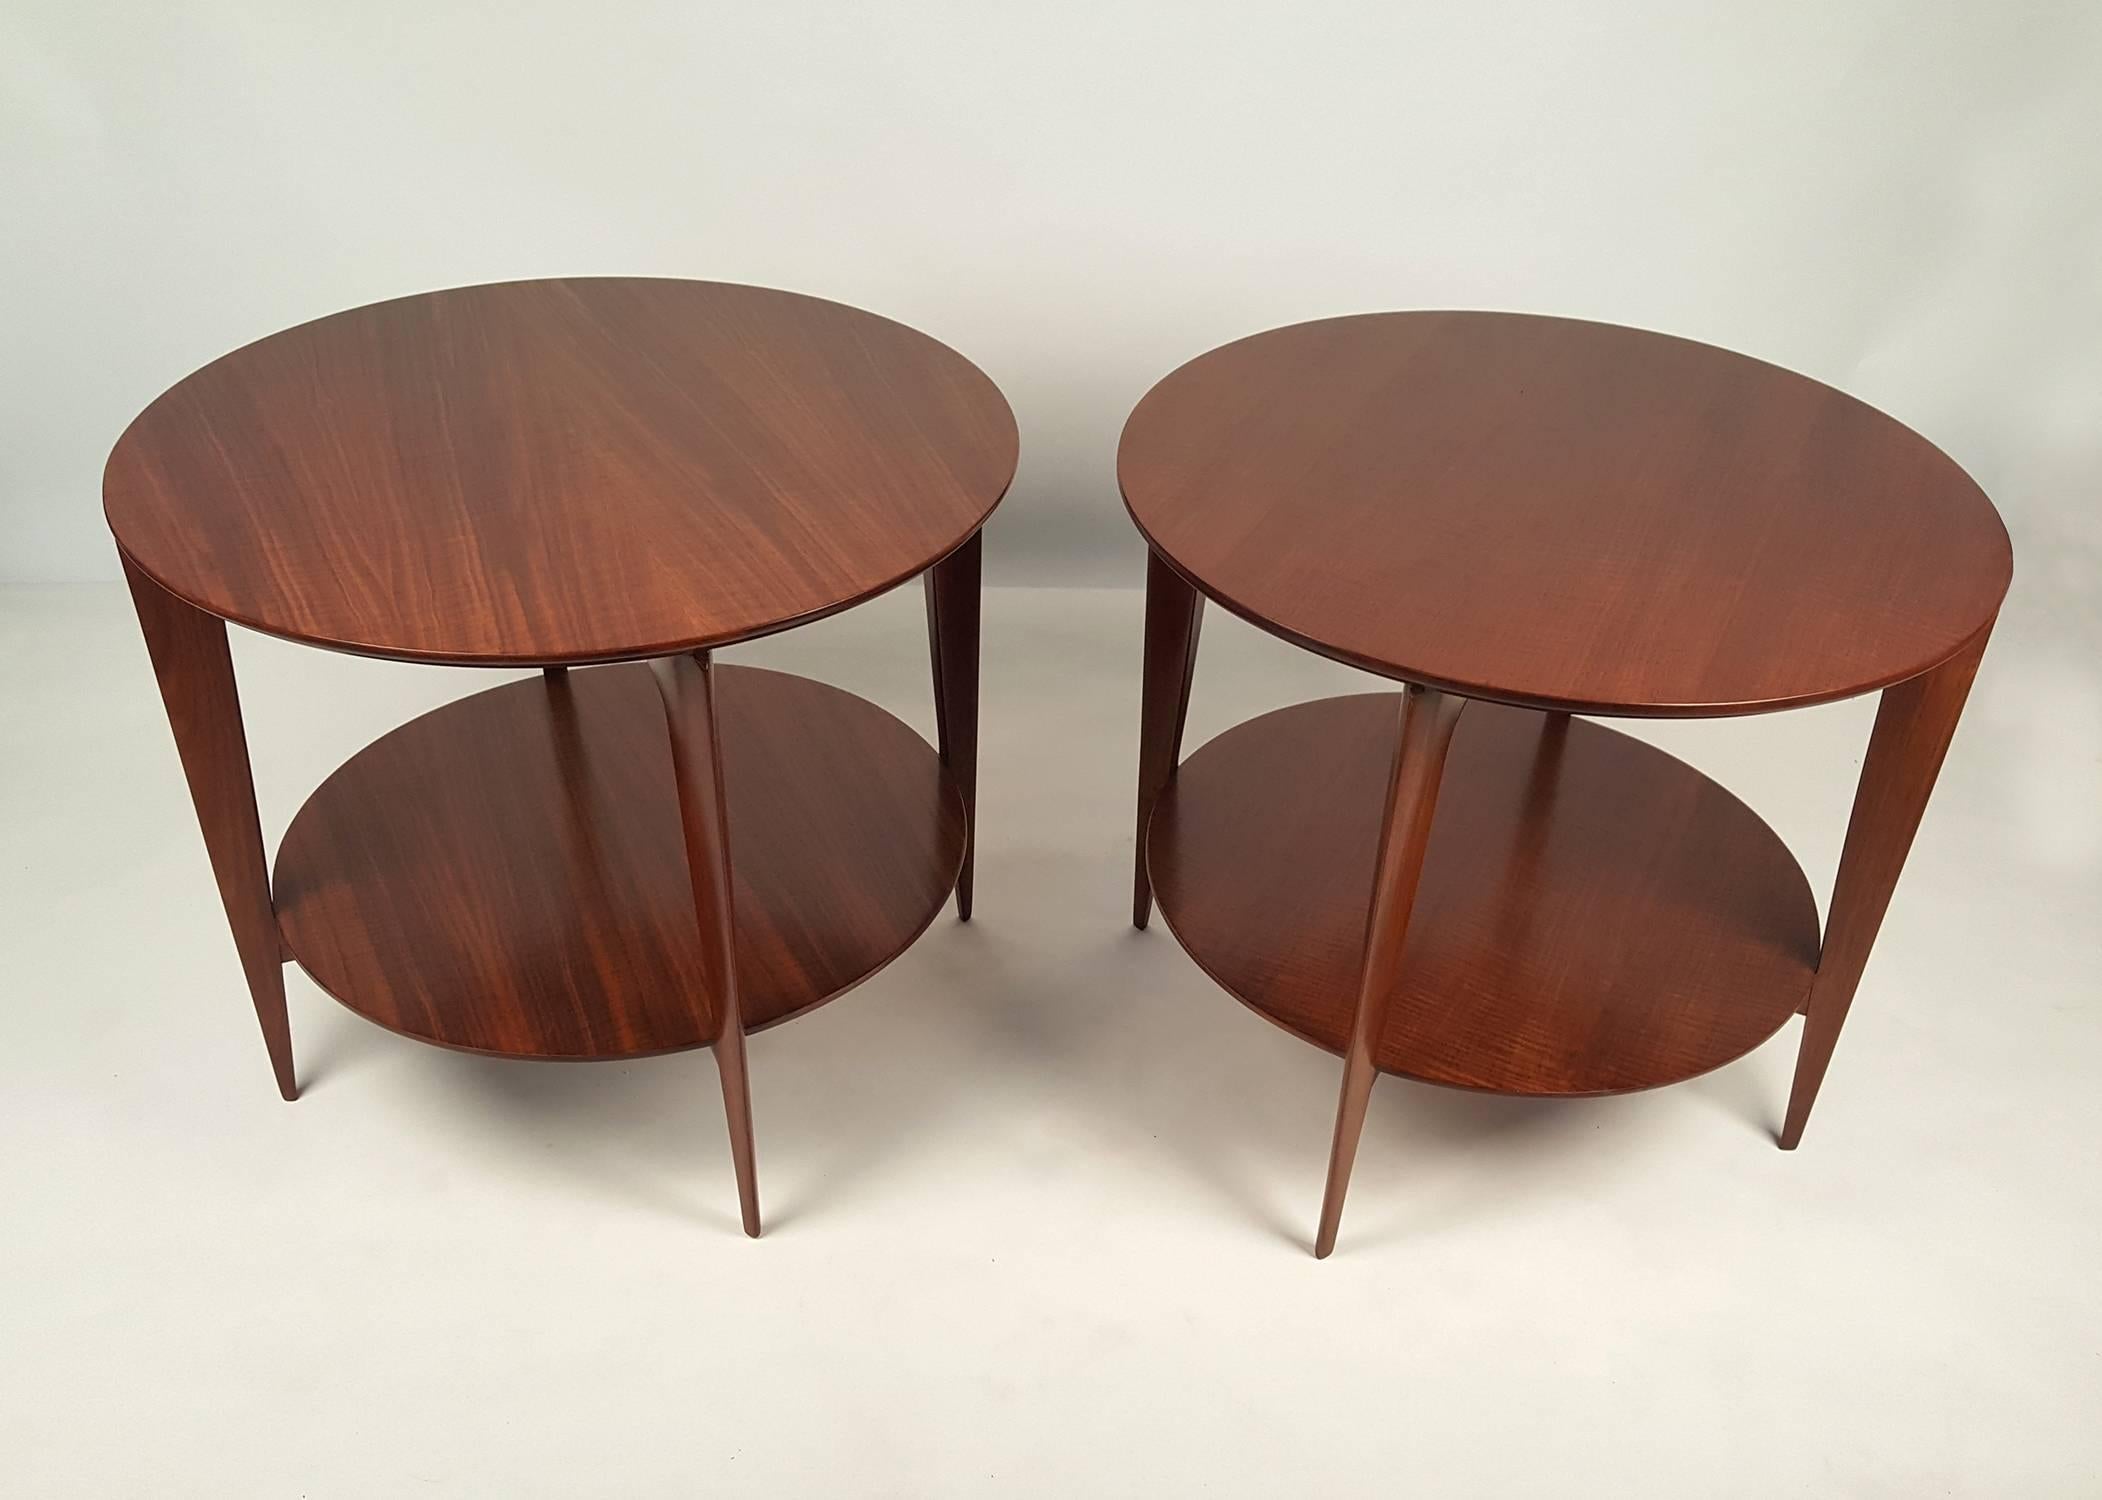 Elusive pair of Gio Ponti two-tier end tables for M. Singer & Sons in Italian Walnut. Model 2135.
Both tables retain the original paper label.
